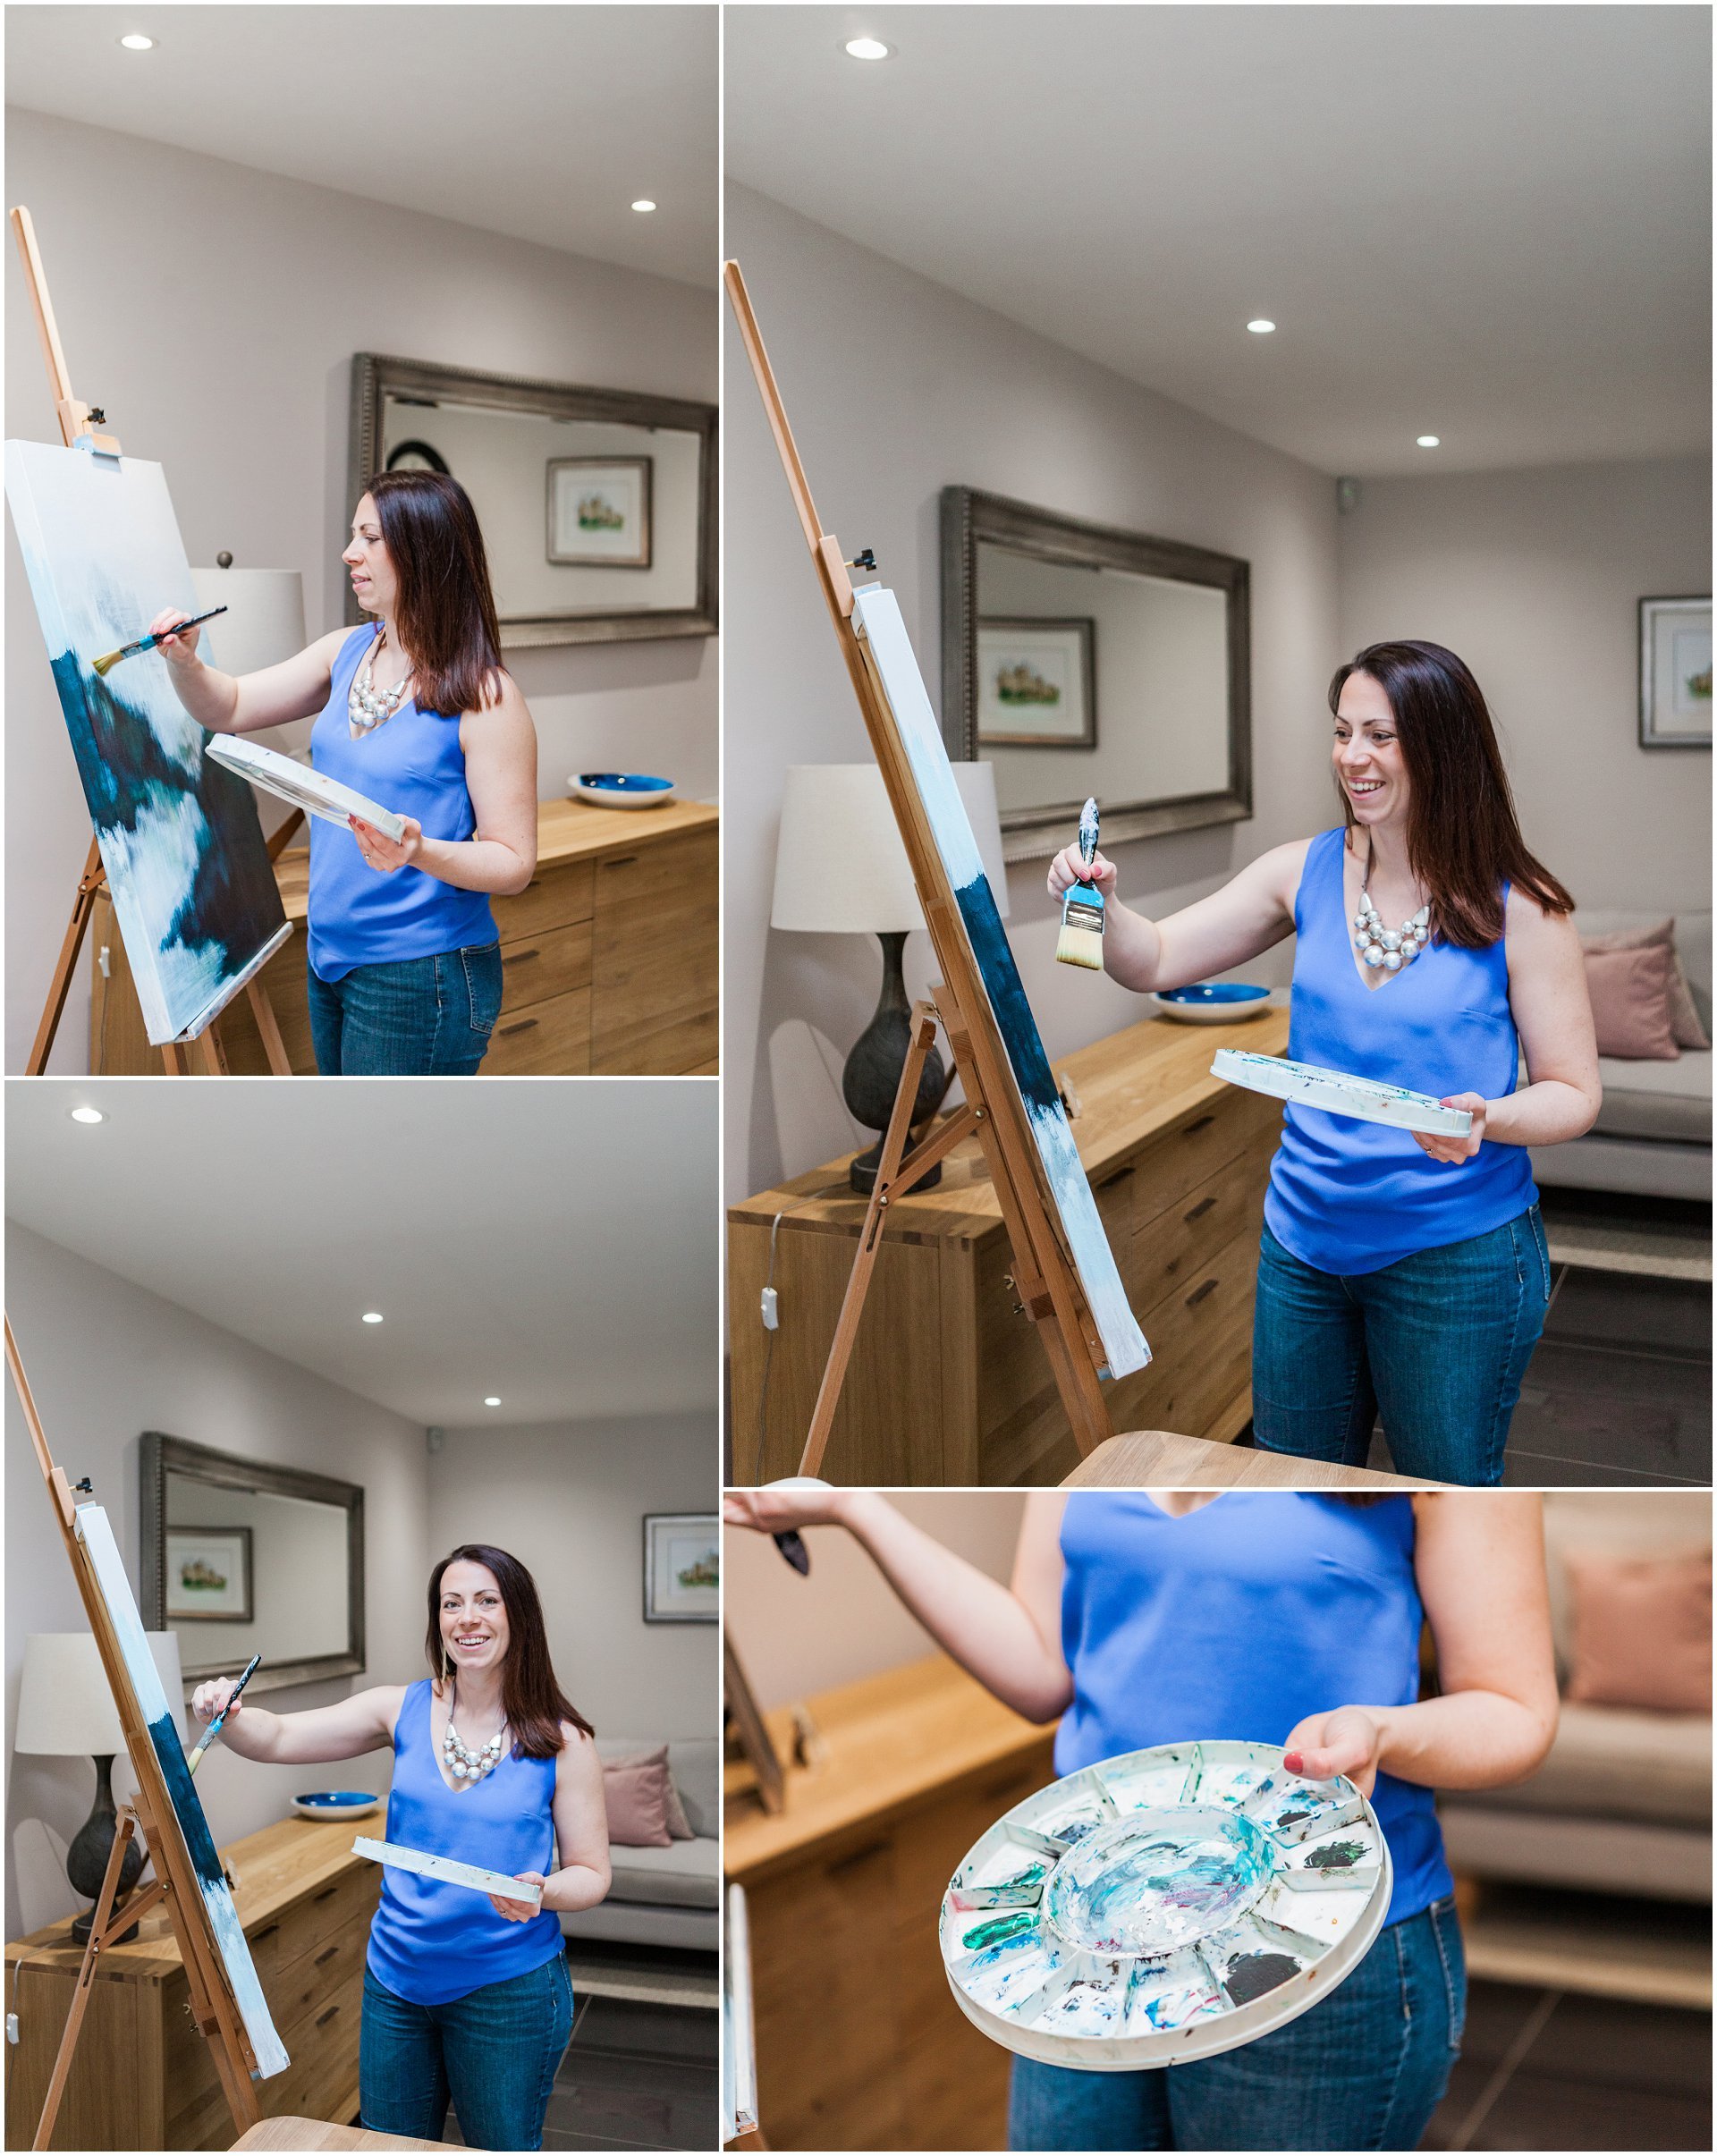 Personal brand shoot showing the creative artist of business consultant Katherine Allan. Images by London branding photographer AKP Branding Stories